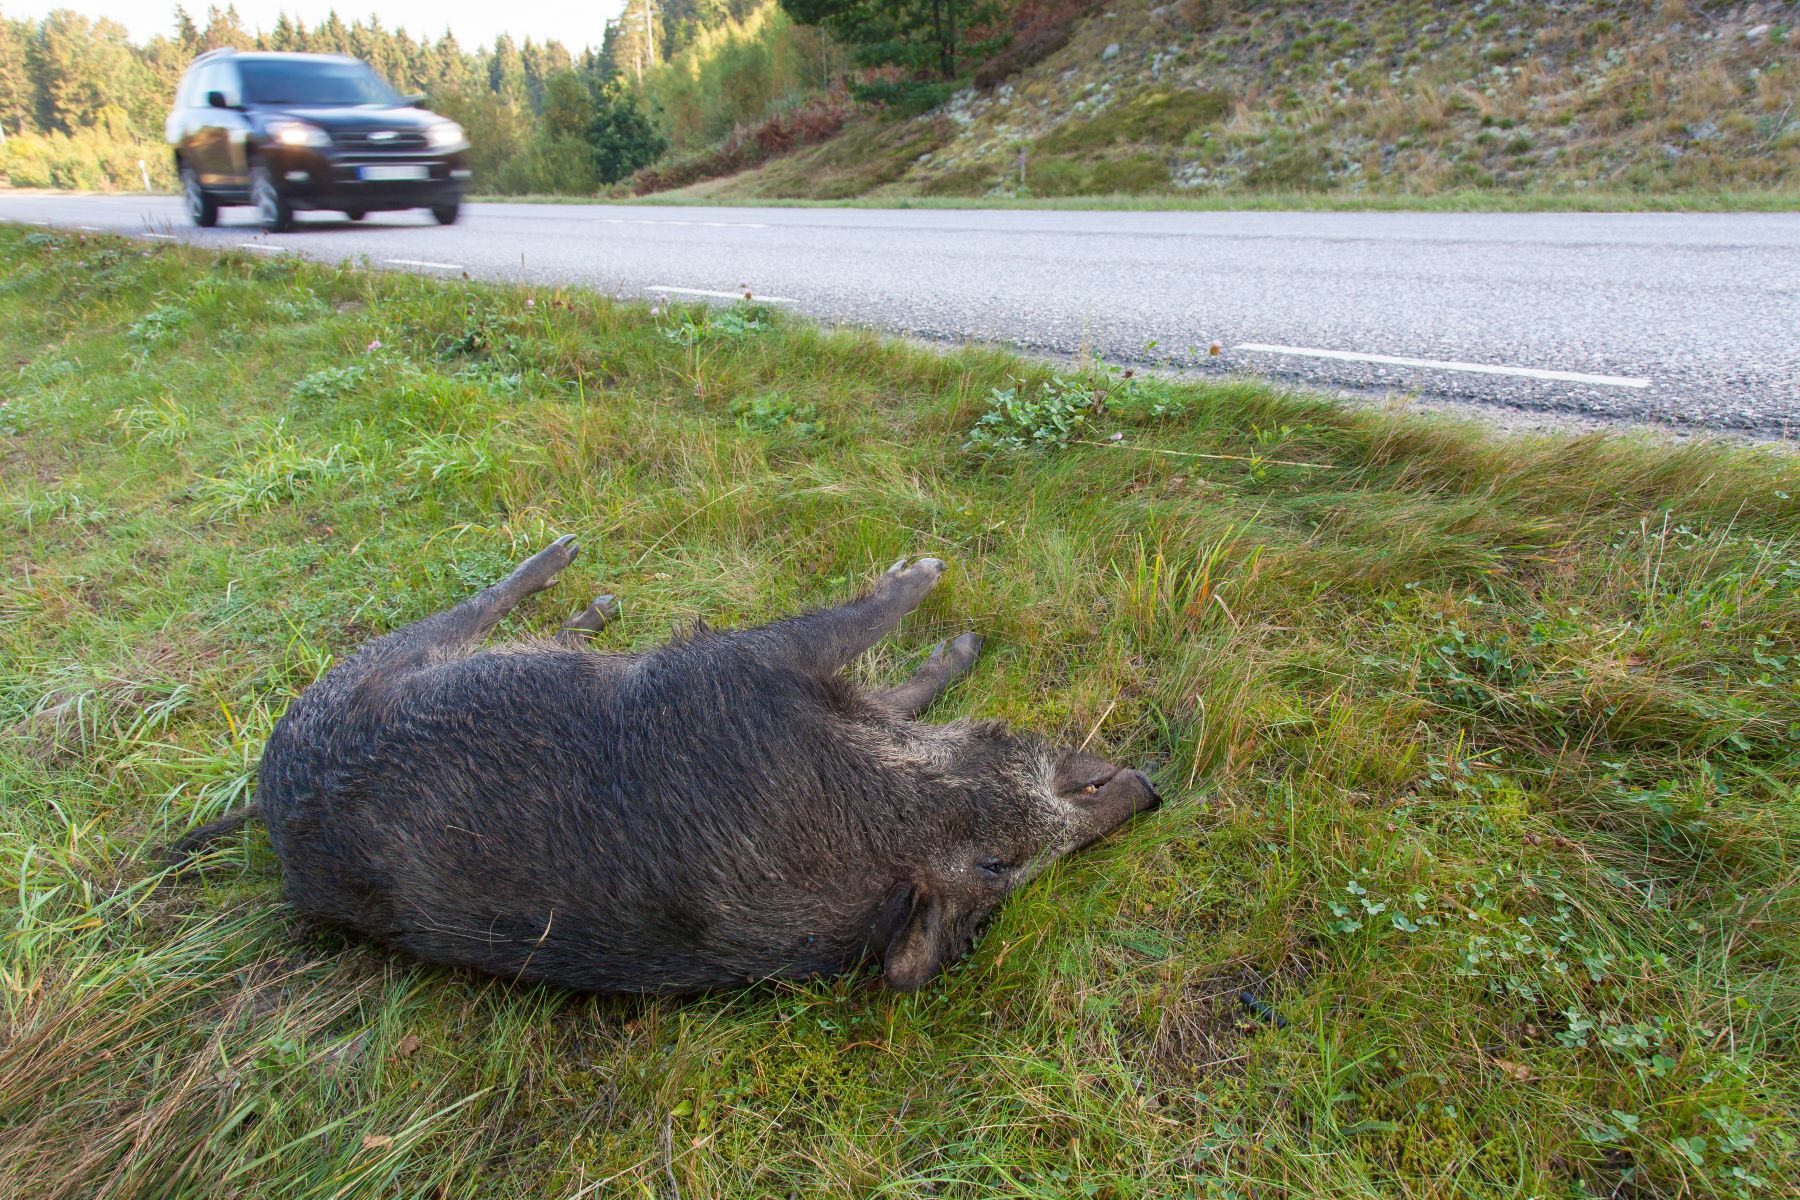 A wild boar turned into roadkill as the result of a collision with a motor vehicle